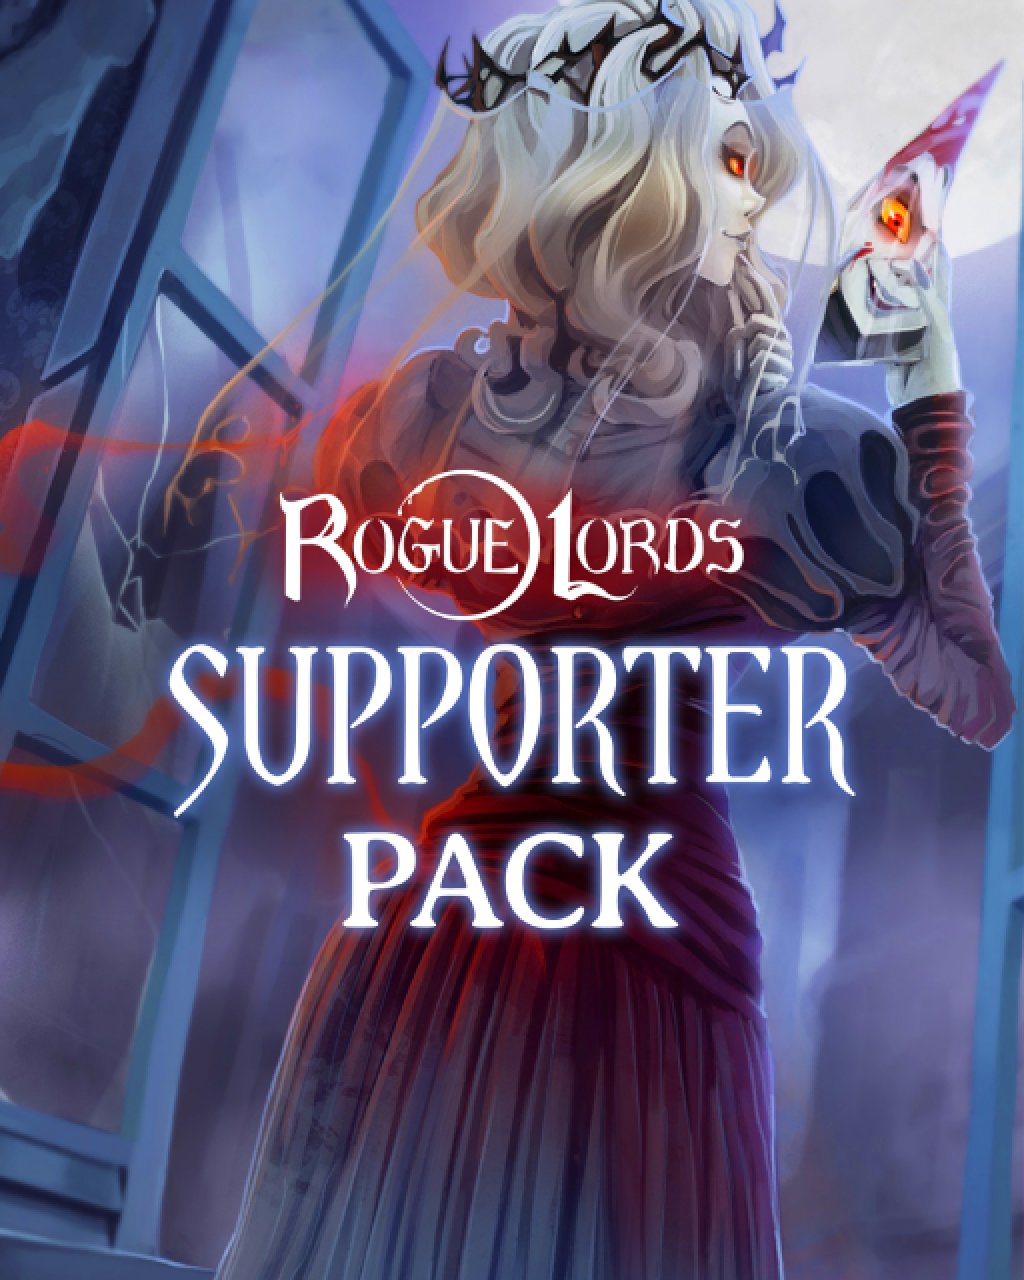 Rogue Lords Supporter Pack